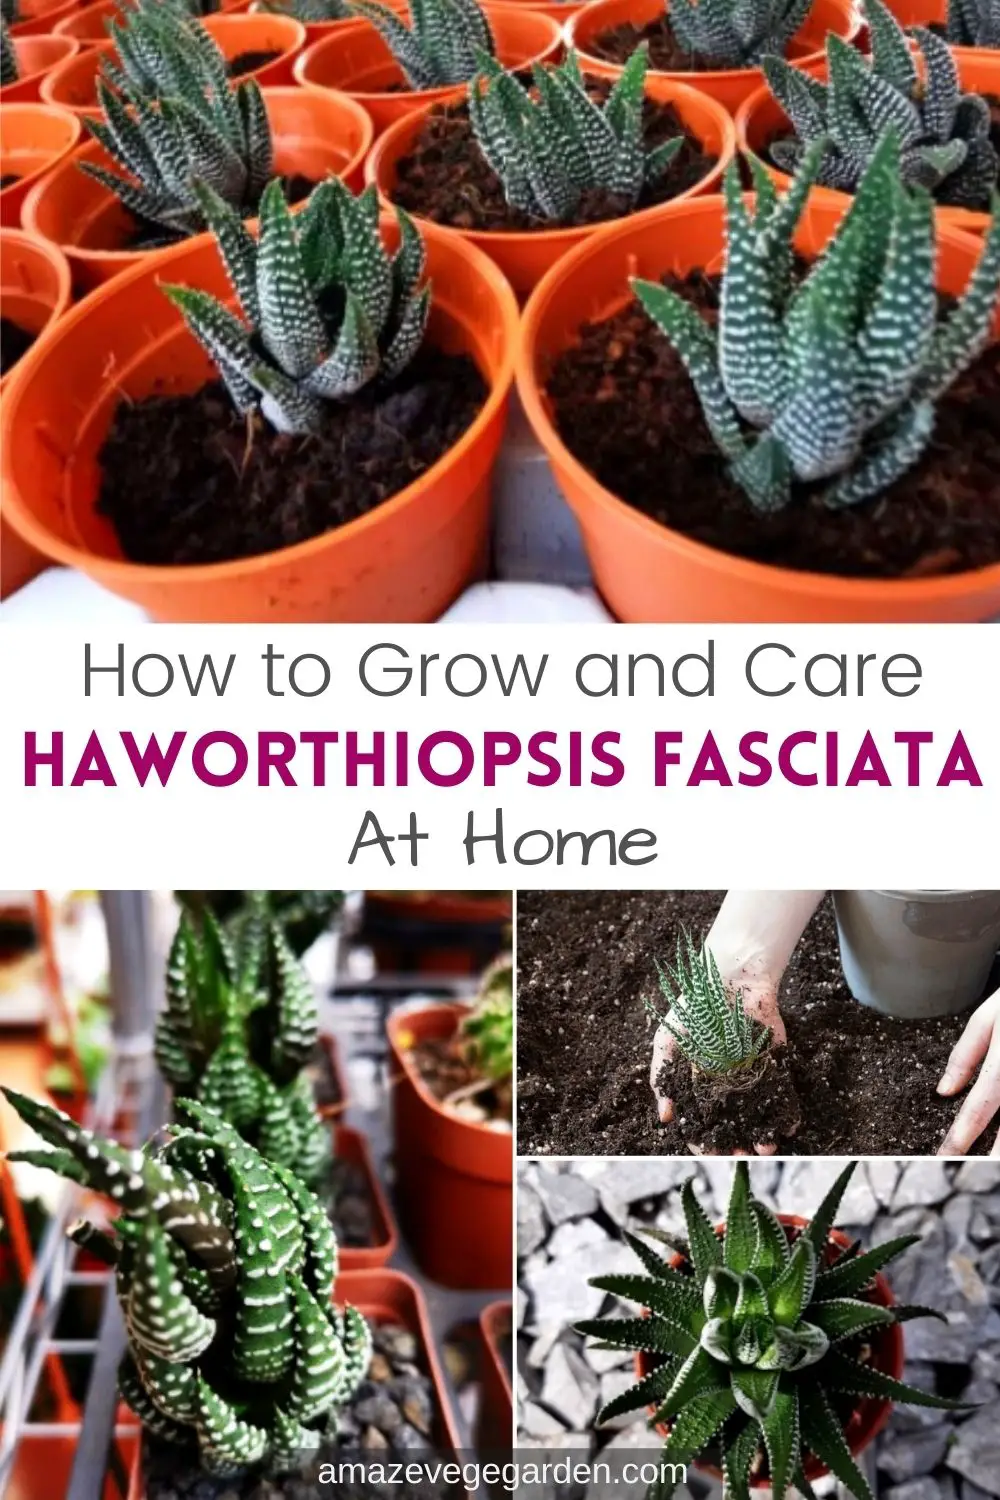 How to Grow and Care for Haworthiopsis Fasciata